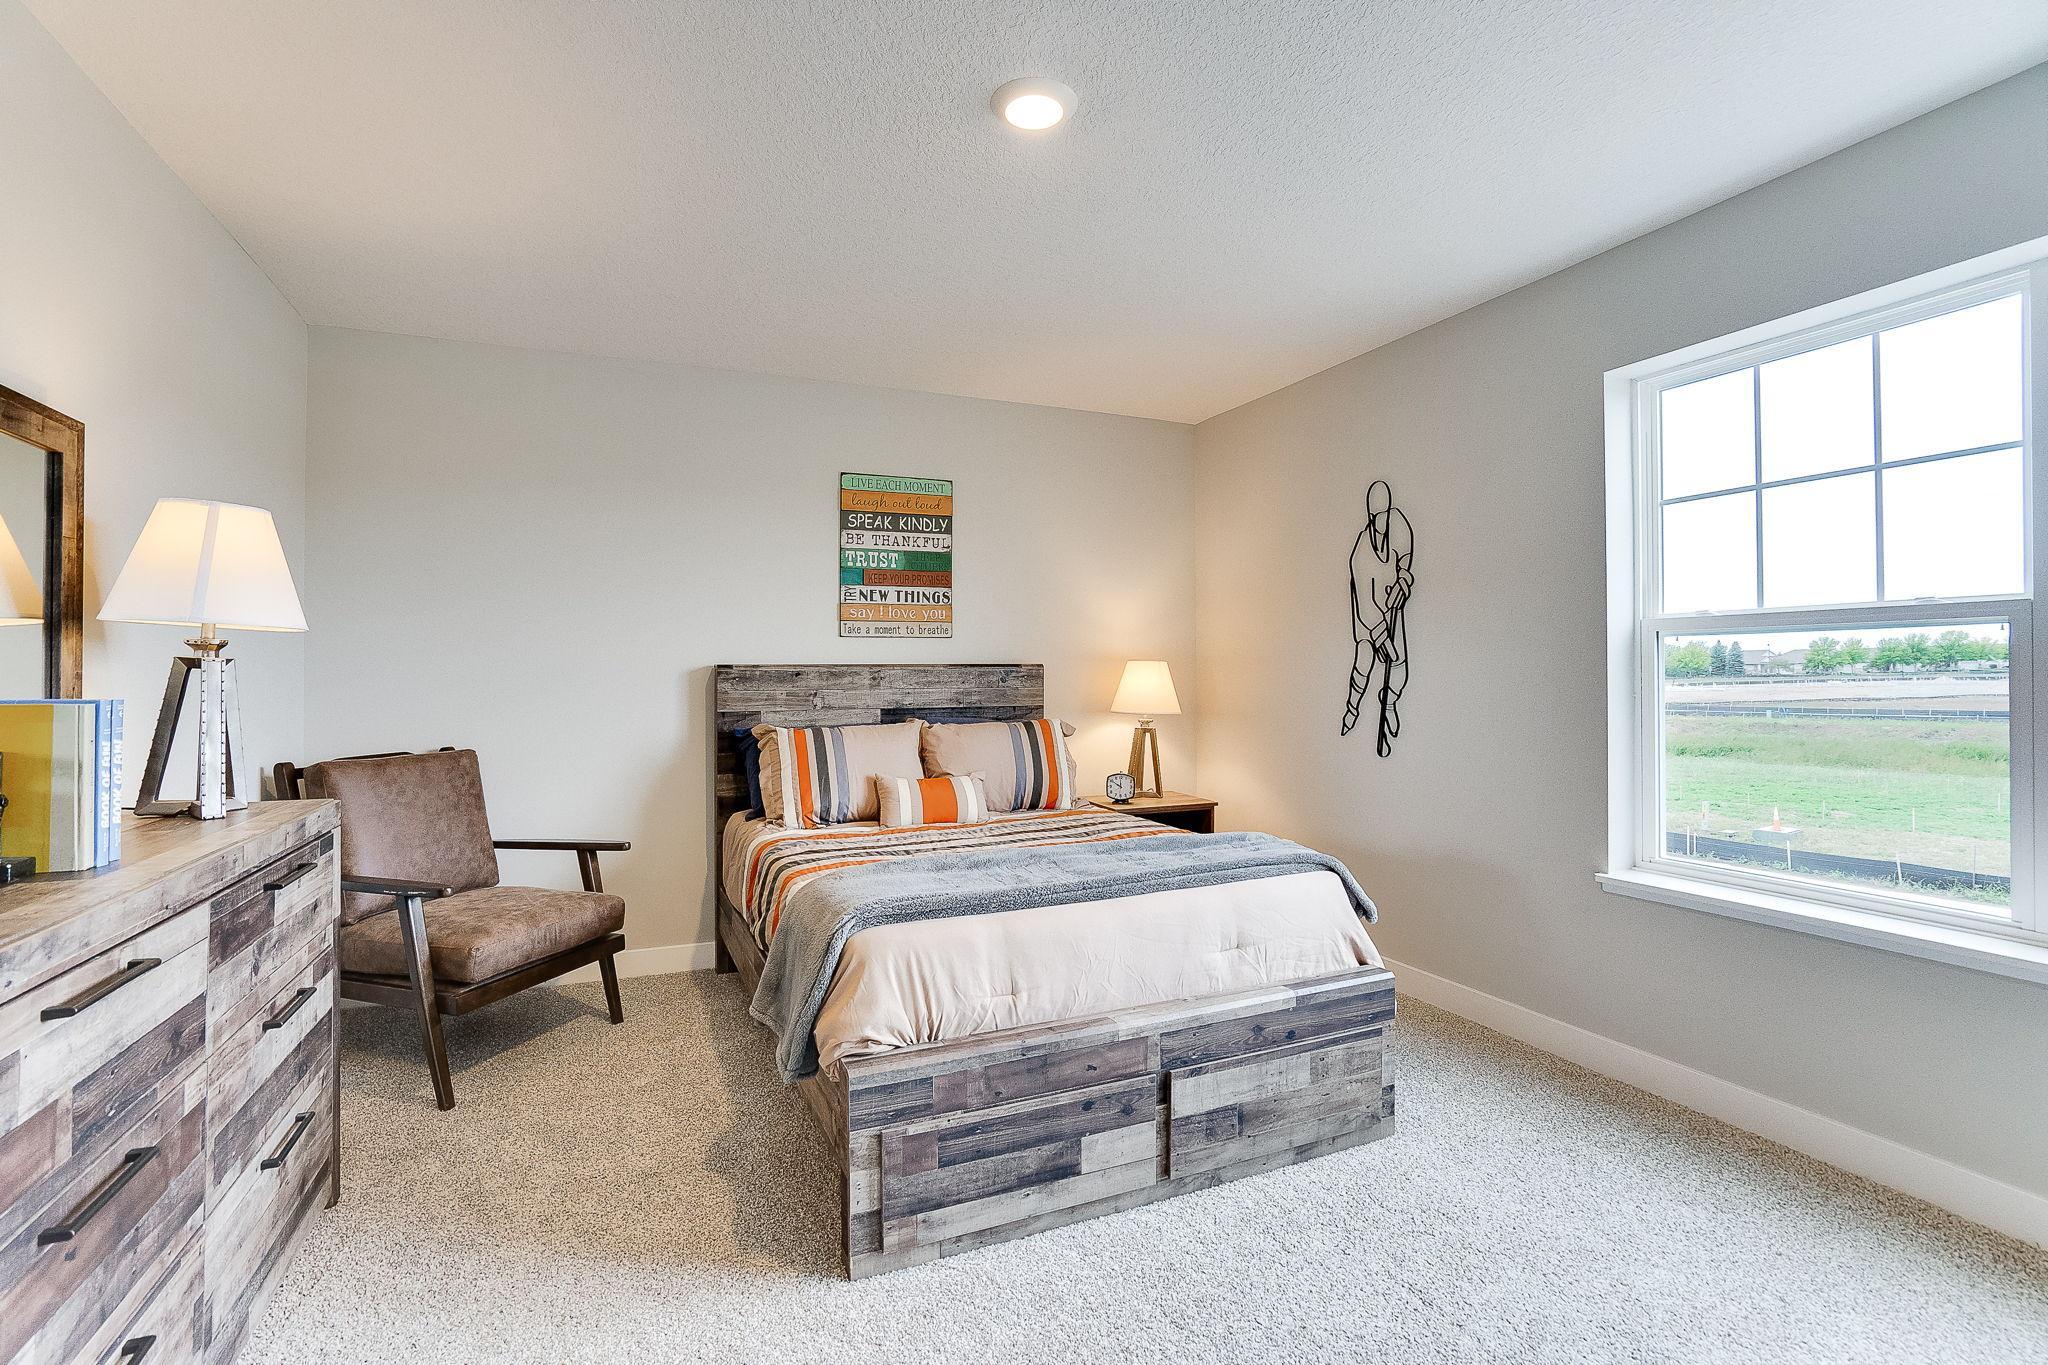 One of three additional bedrooms - all big enough to accommodate whatever setup you would like! (Model home, colors will vary)